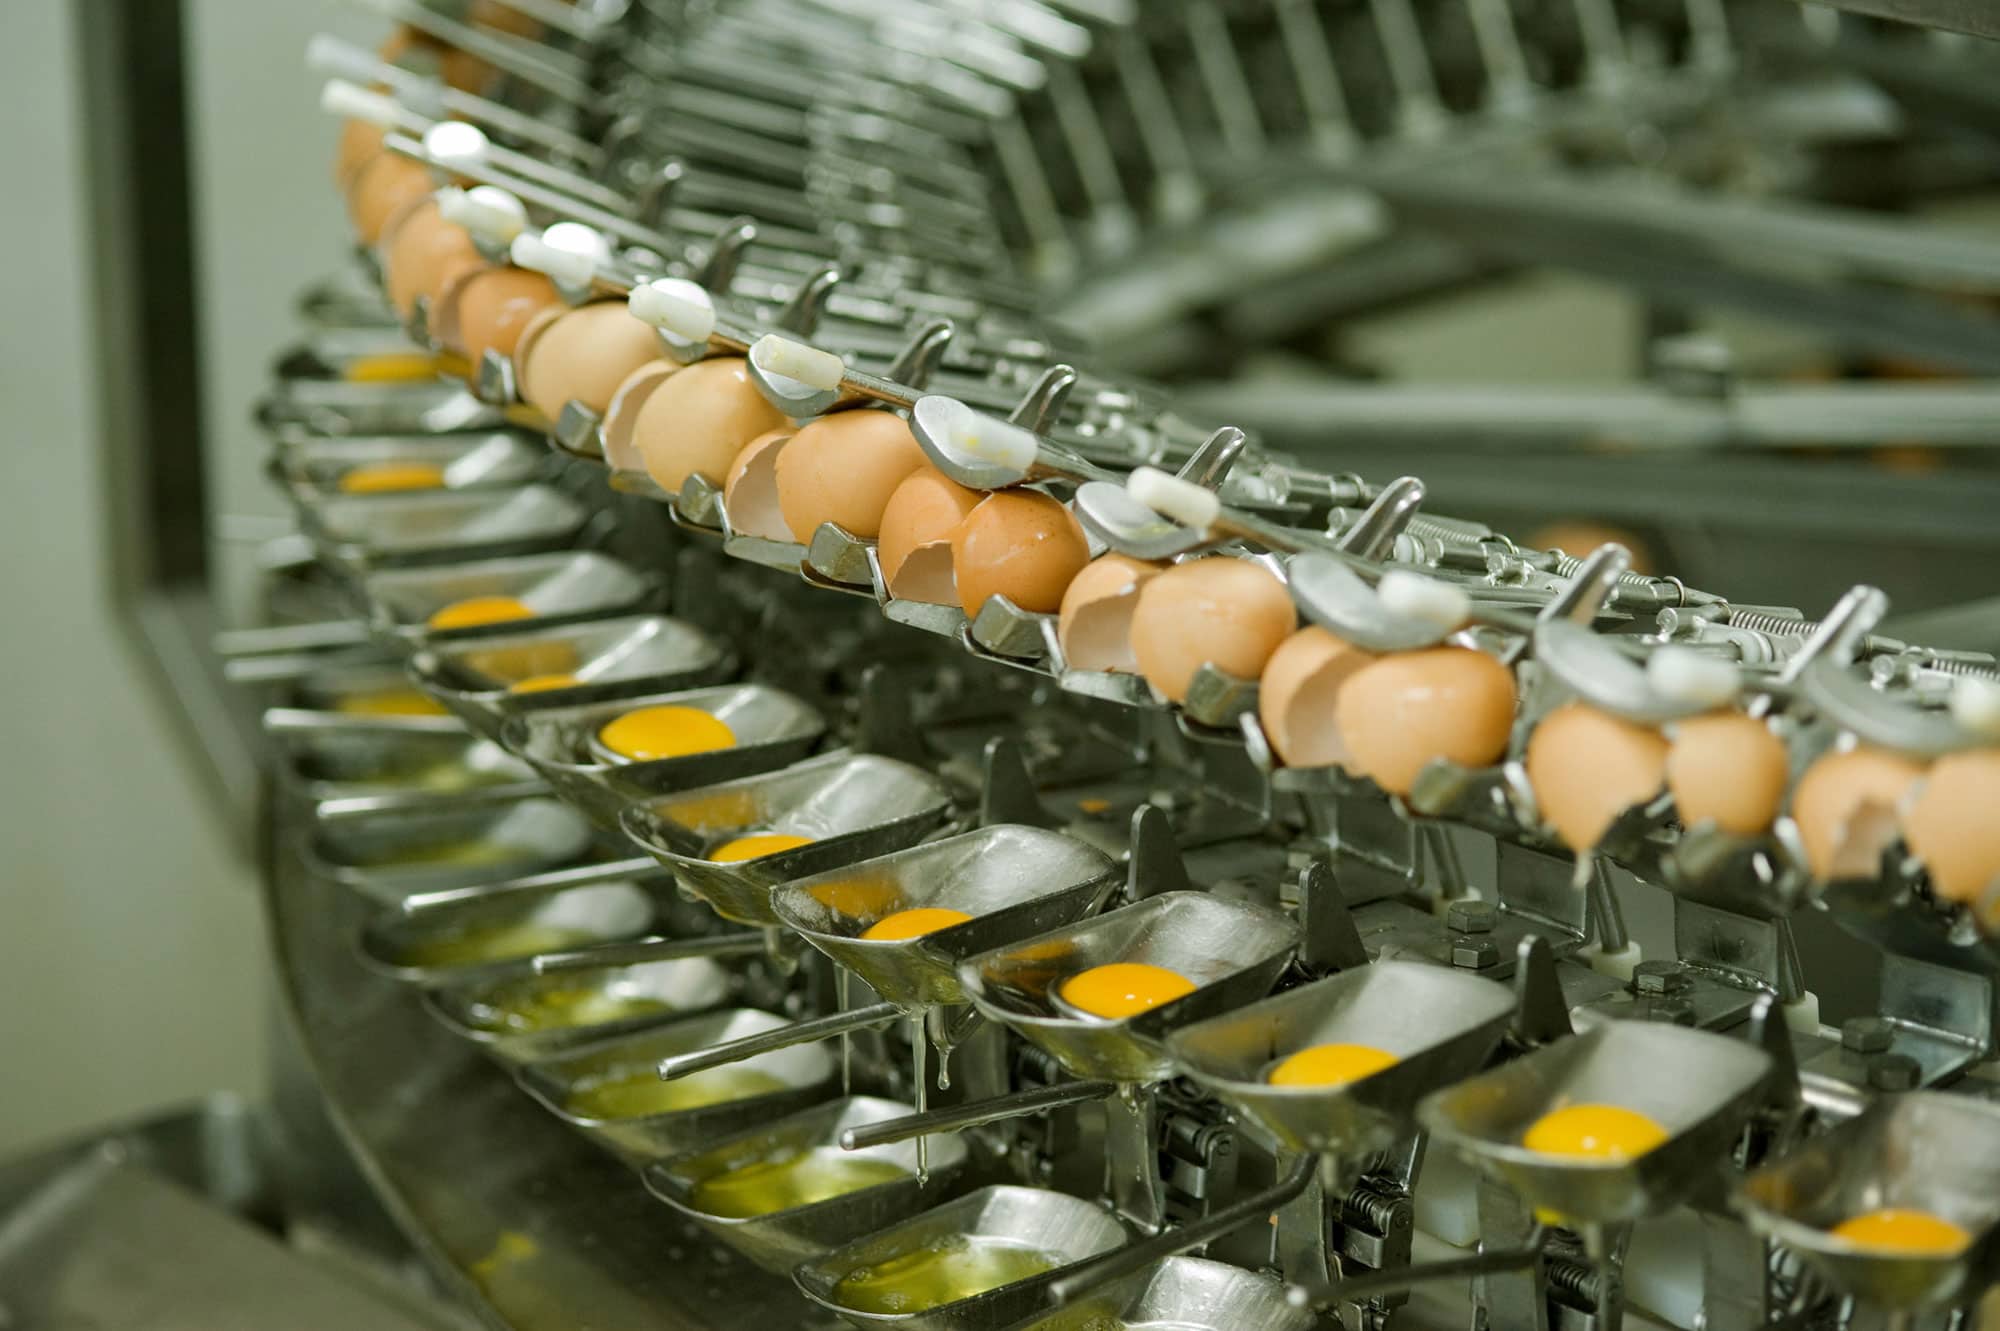 Close-up of an Eggs Unlimited factory's egg cracking machine in action, expertly separating egg yolks from whites, a process essential for producing and selling high-quality liquid egg products.